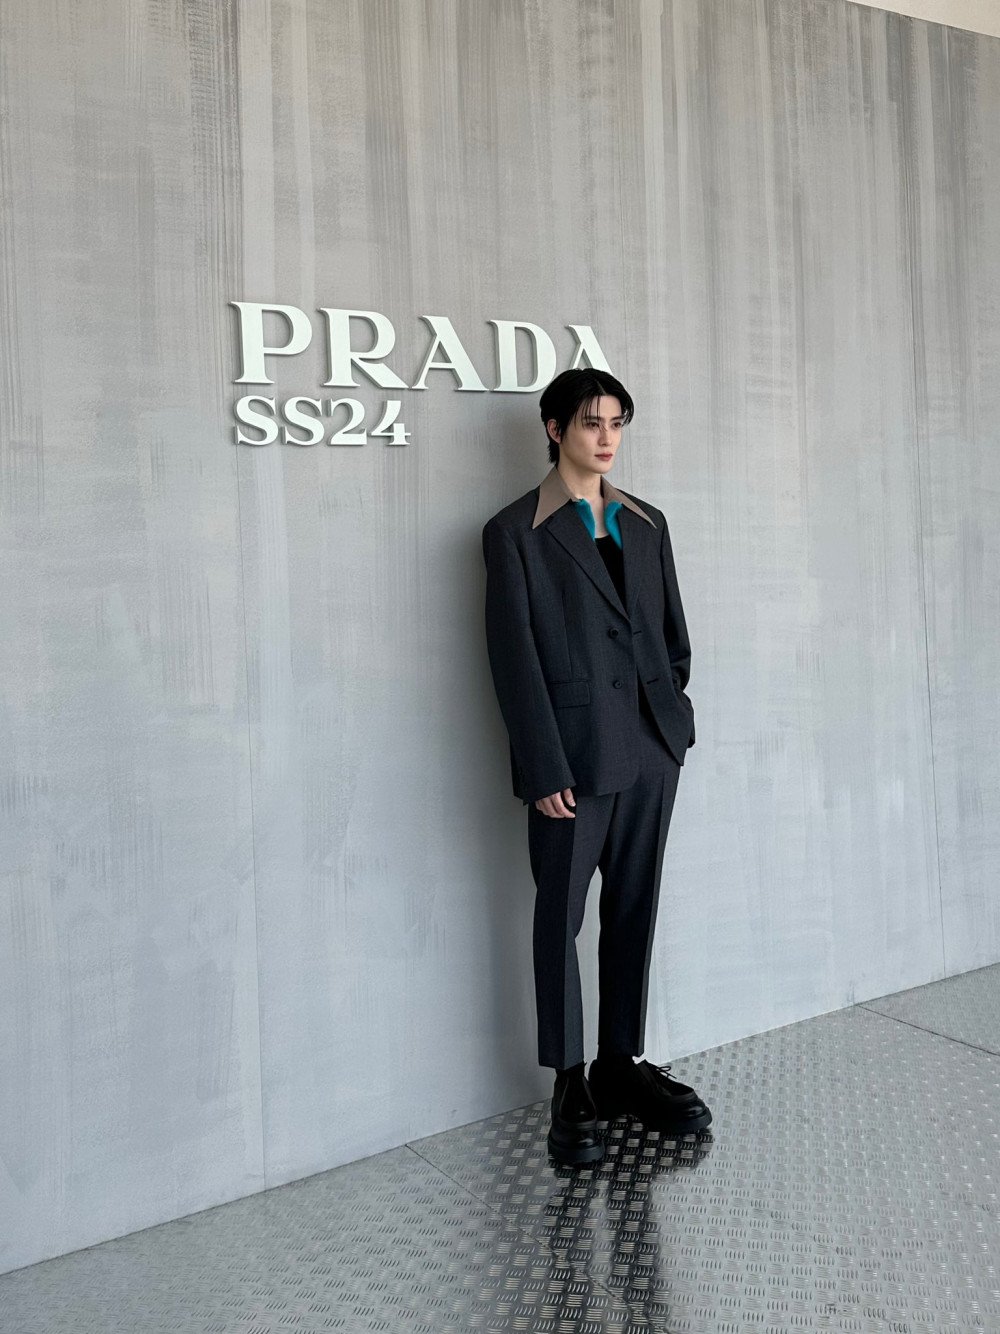 NCT's Jaehyun looks stunning at Prada S/S24 collection event in Milan ...